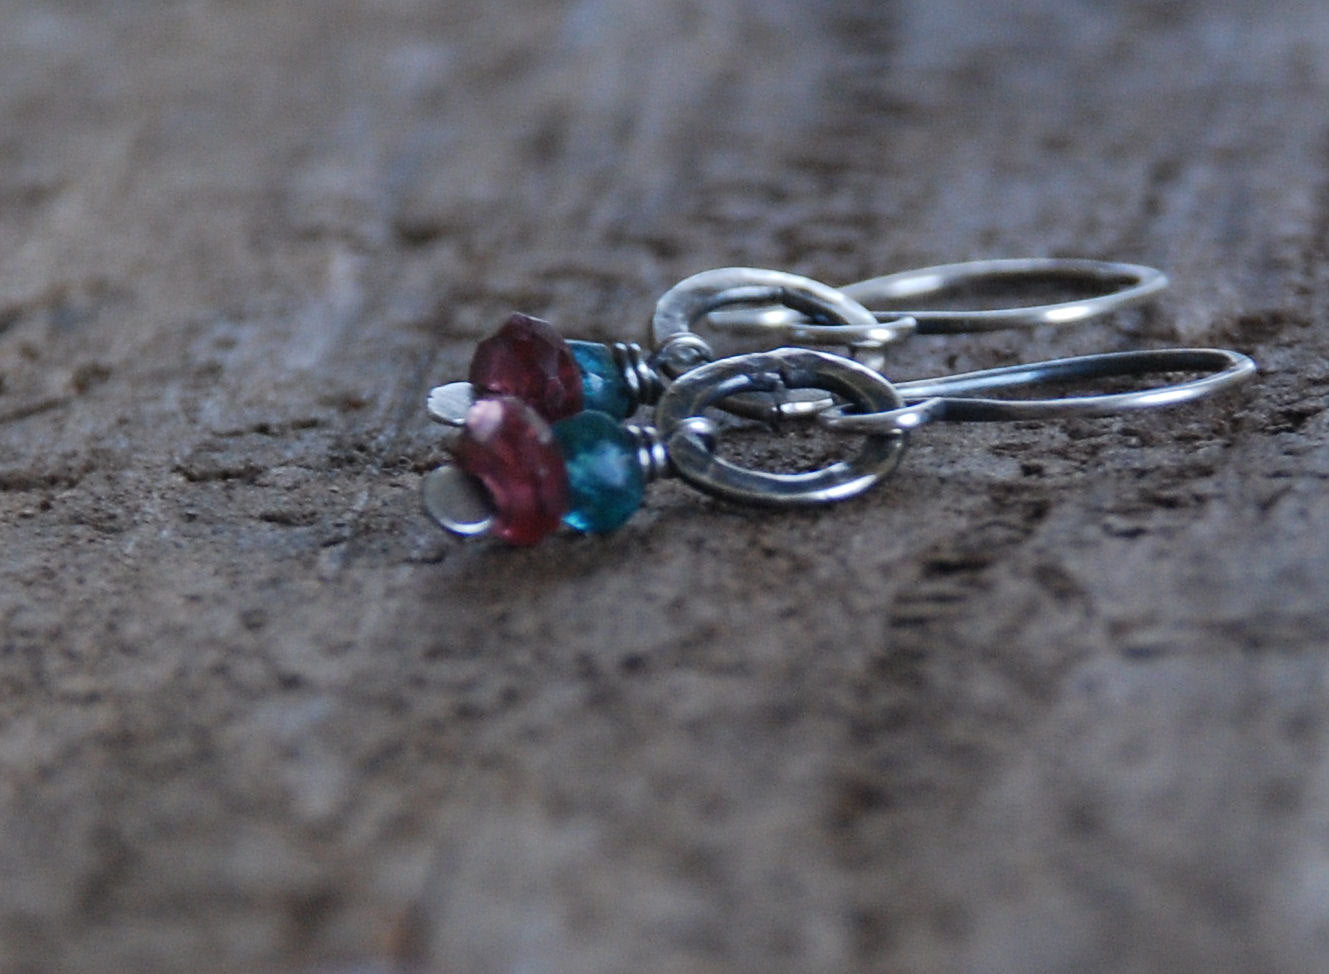 Sashay Earrings - Handmade. Apatite. Garnet. Textured and oxidized Sterling Silver